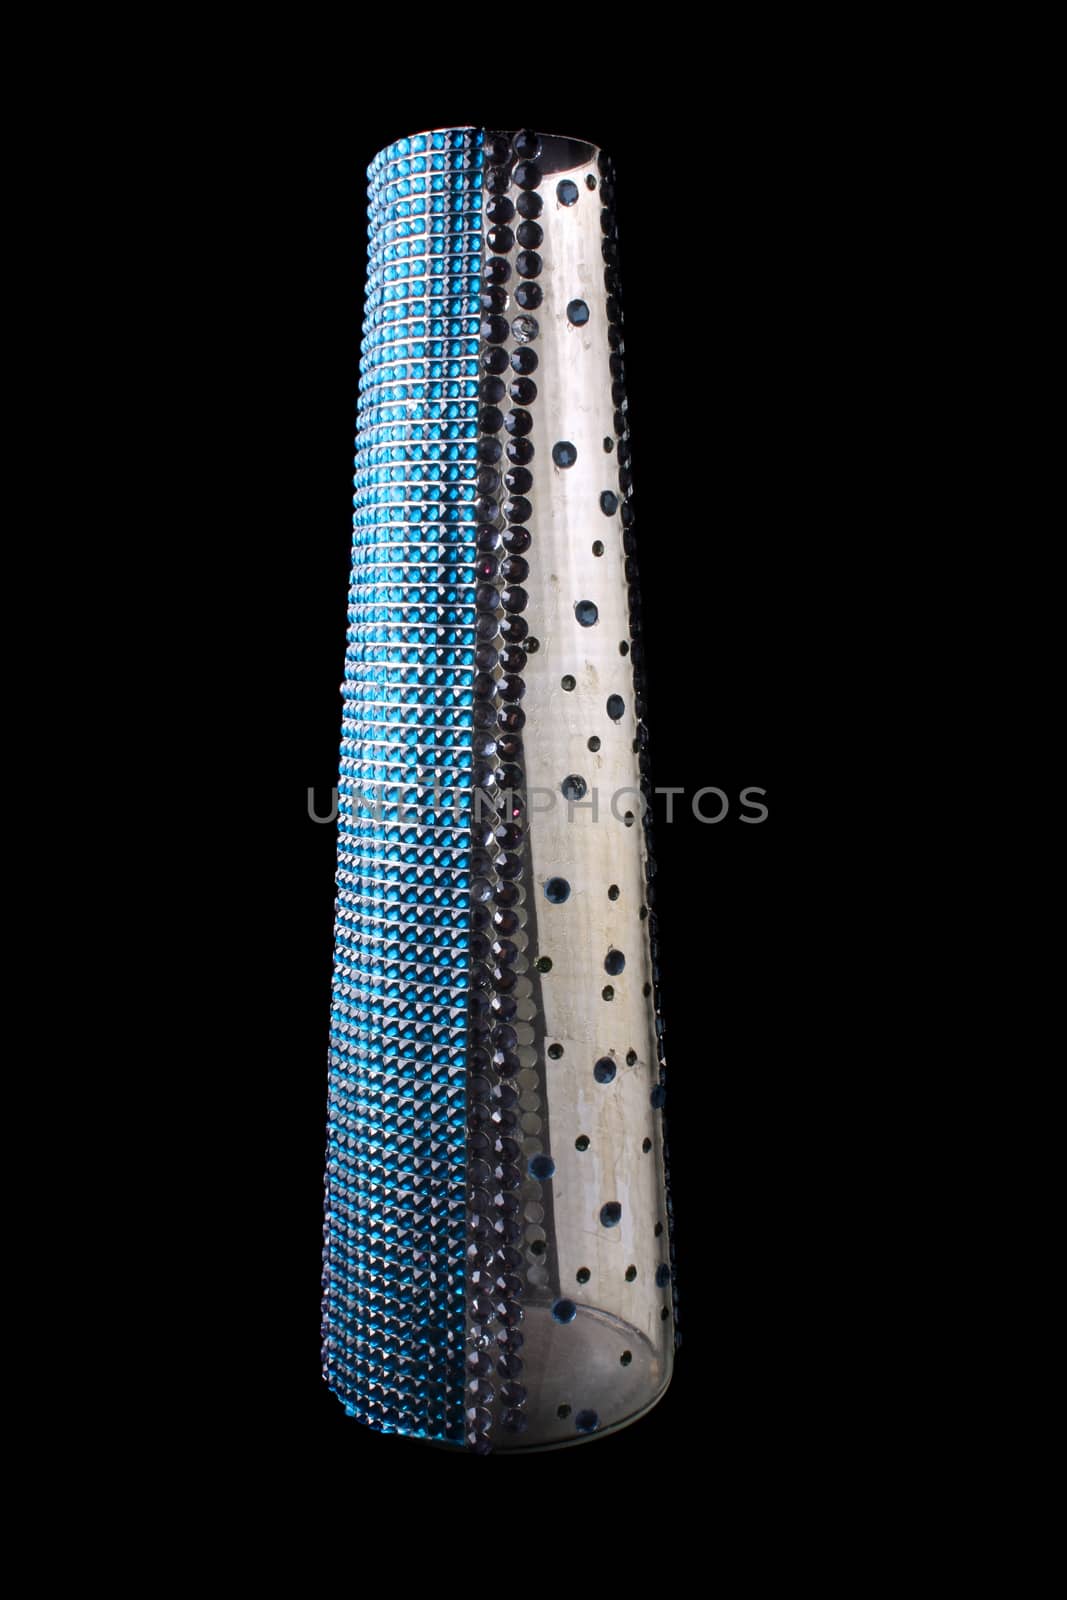 An ethnic flower vase with a beautiful design of blue and silver glass beads, on black background.